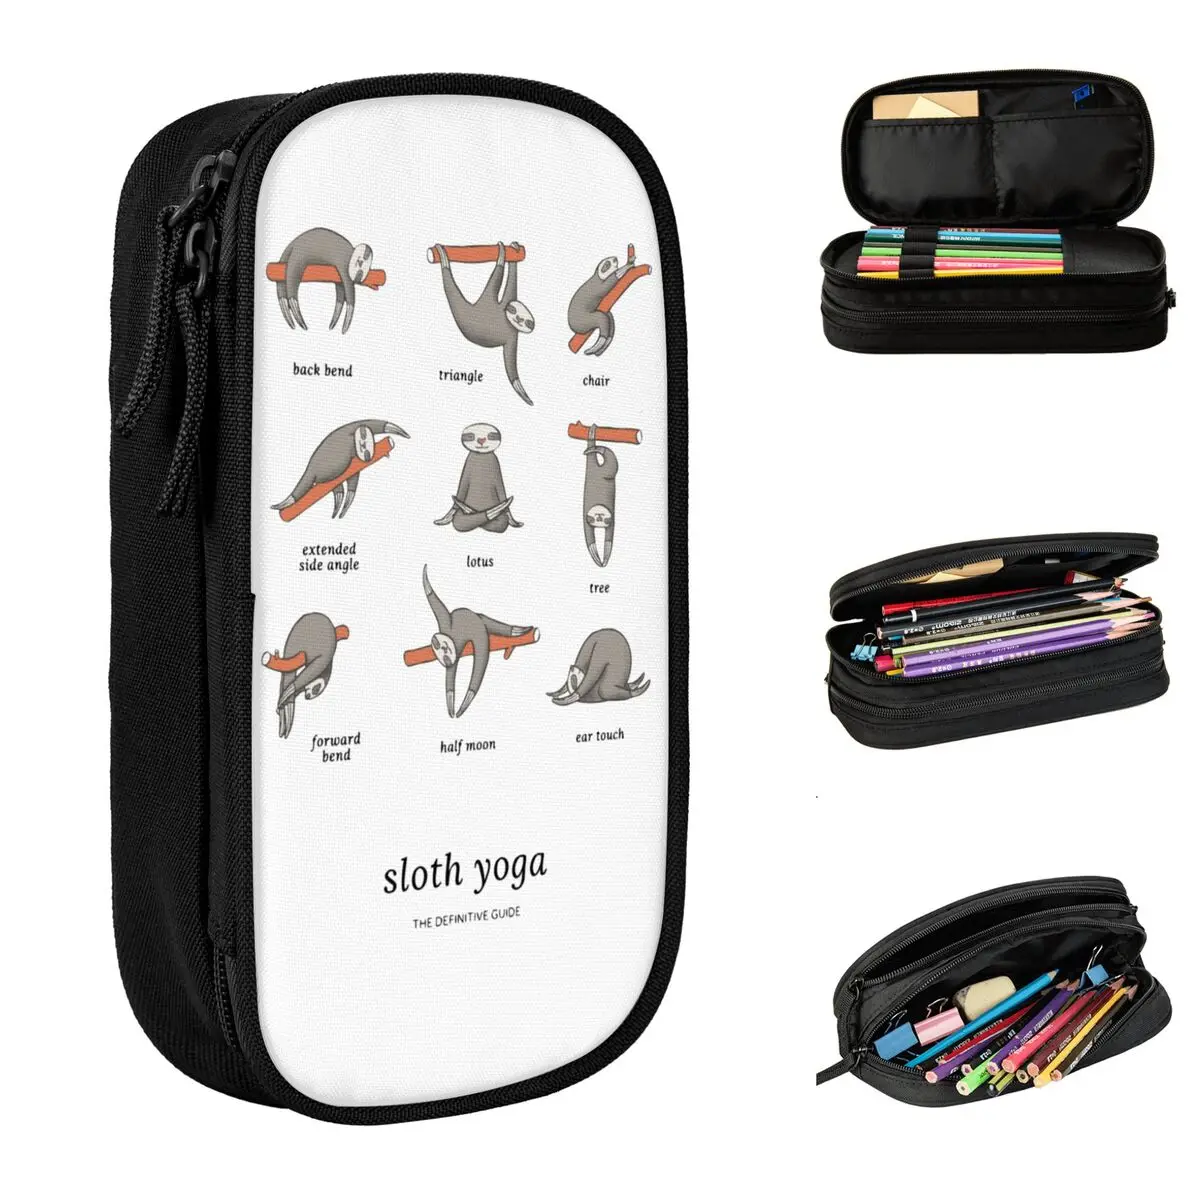 

Sloth Yoga The Definitive Guide Pencil Case Pencilcases Pen Holder Student Big Capacity Bag Students School Gifts Accessories